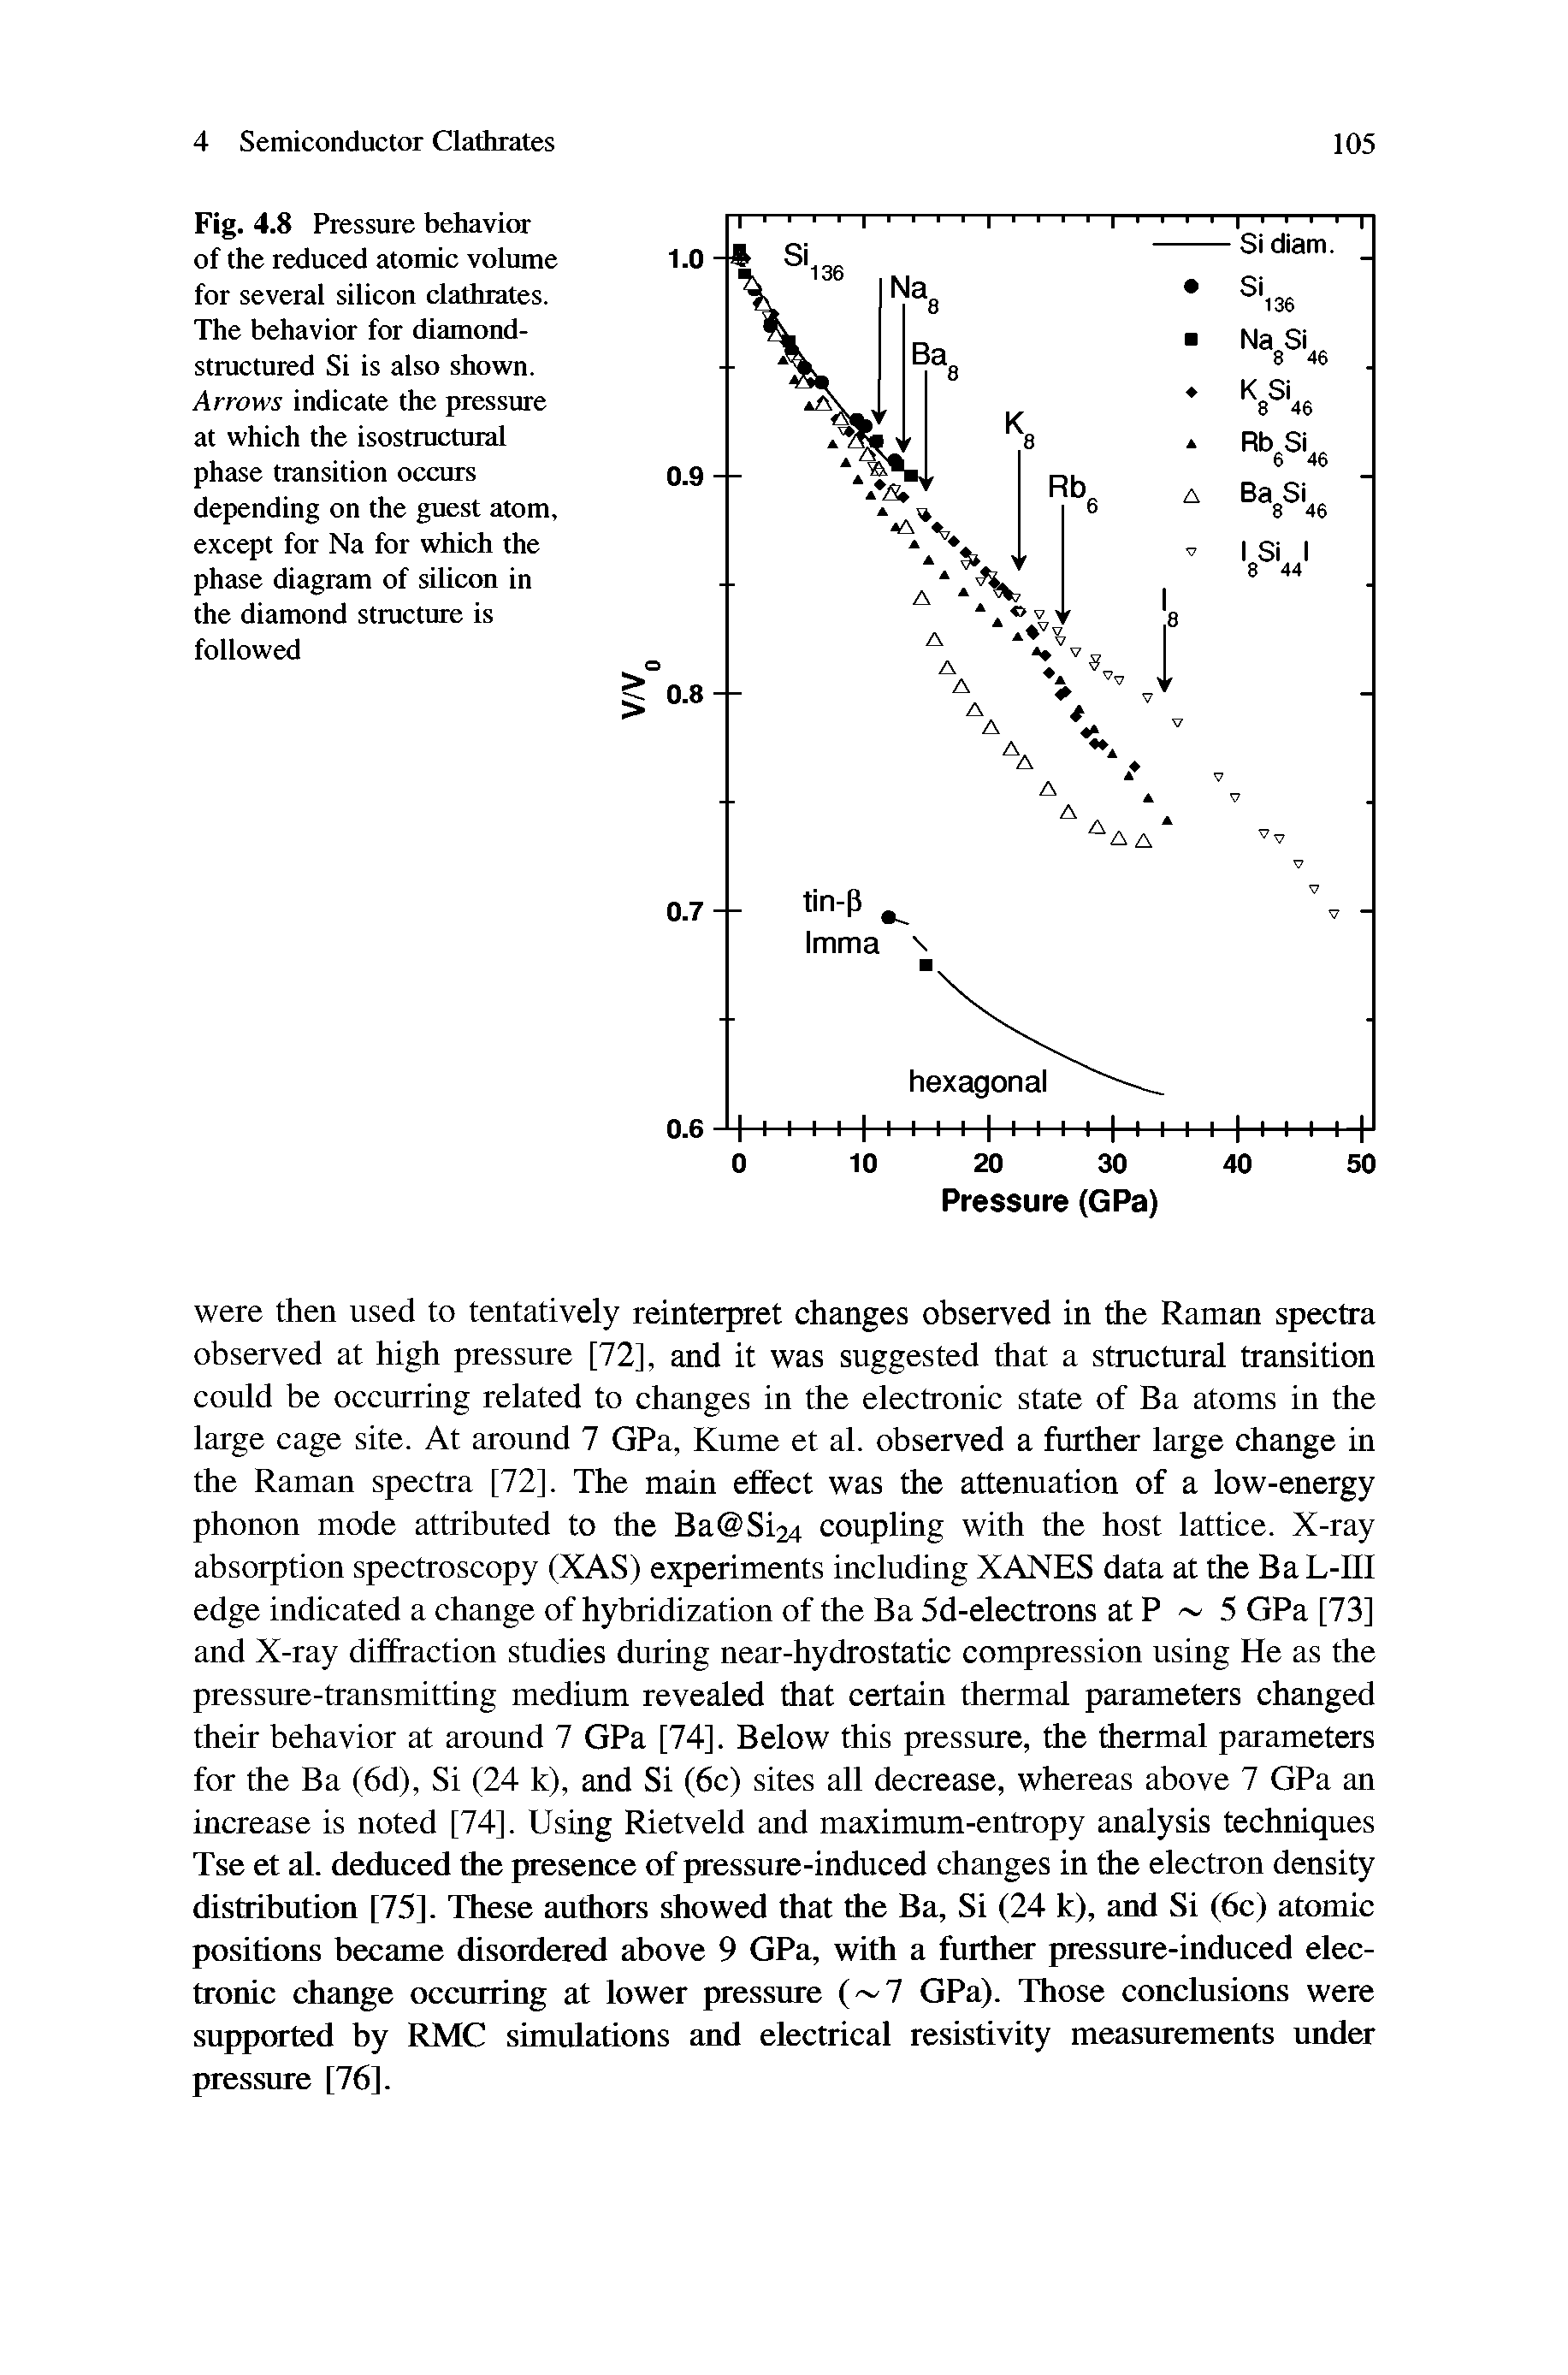 Fig. 4.8 Pressure behavior of the reduced atomic volume for several silicon clathrates. The behavior for diamond-structured Si is also shown. Arrows indicate the pressure at which the isostructural phase transition occurs depending on the guest atom, except for Na for which the phase diagram of silicon in the diamond structure is followed...